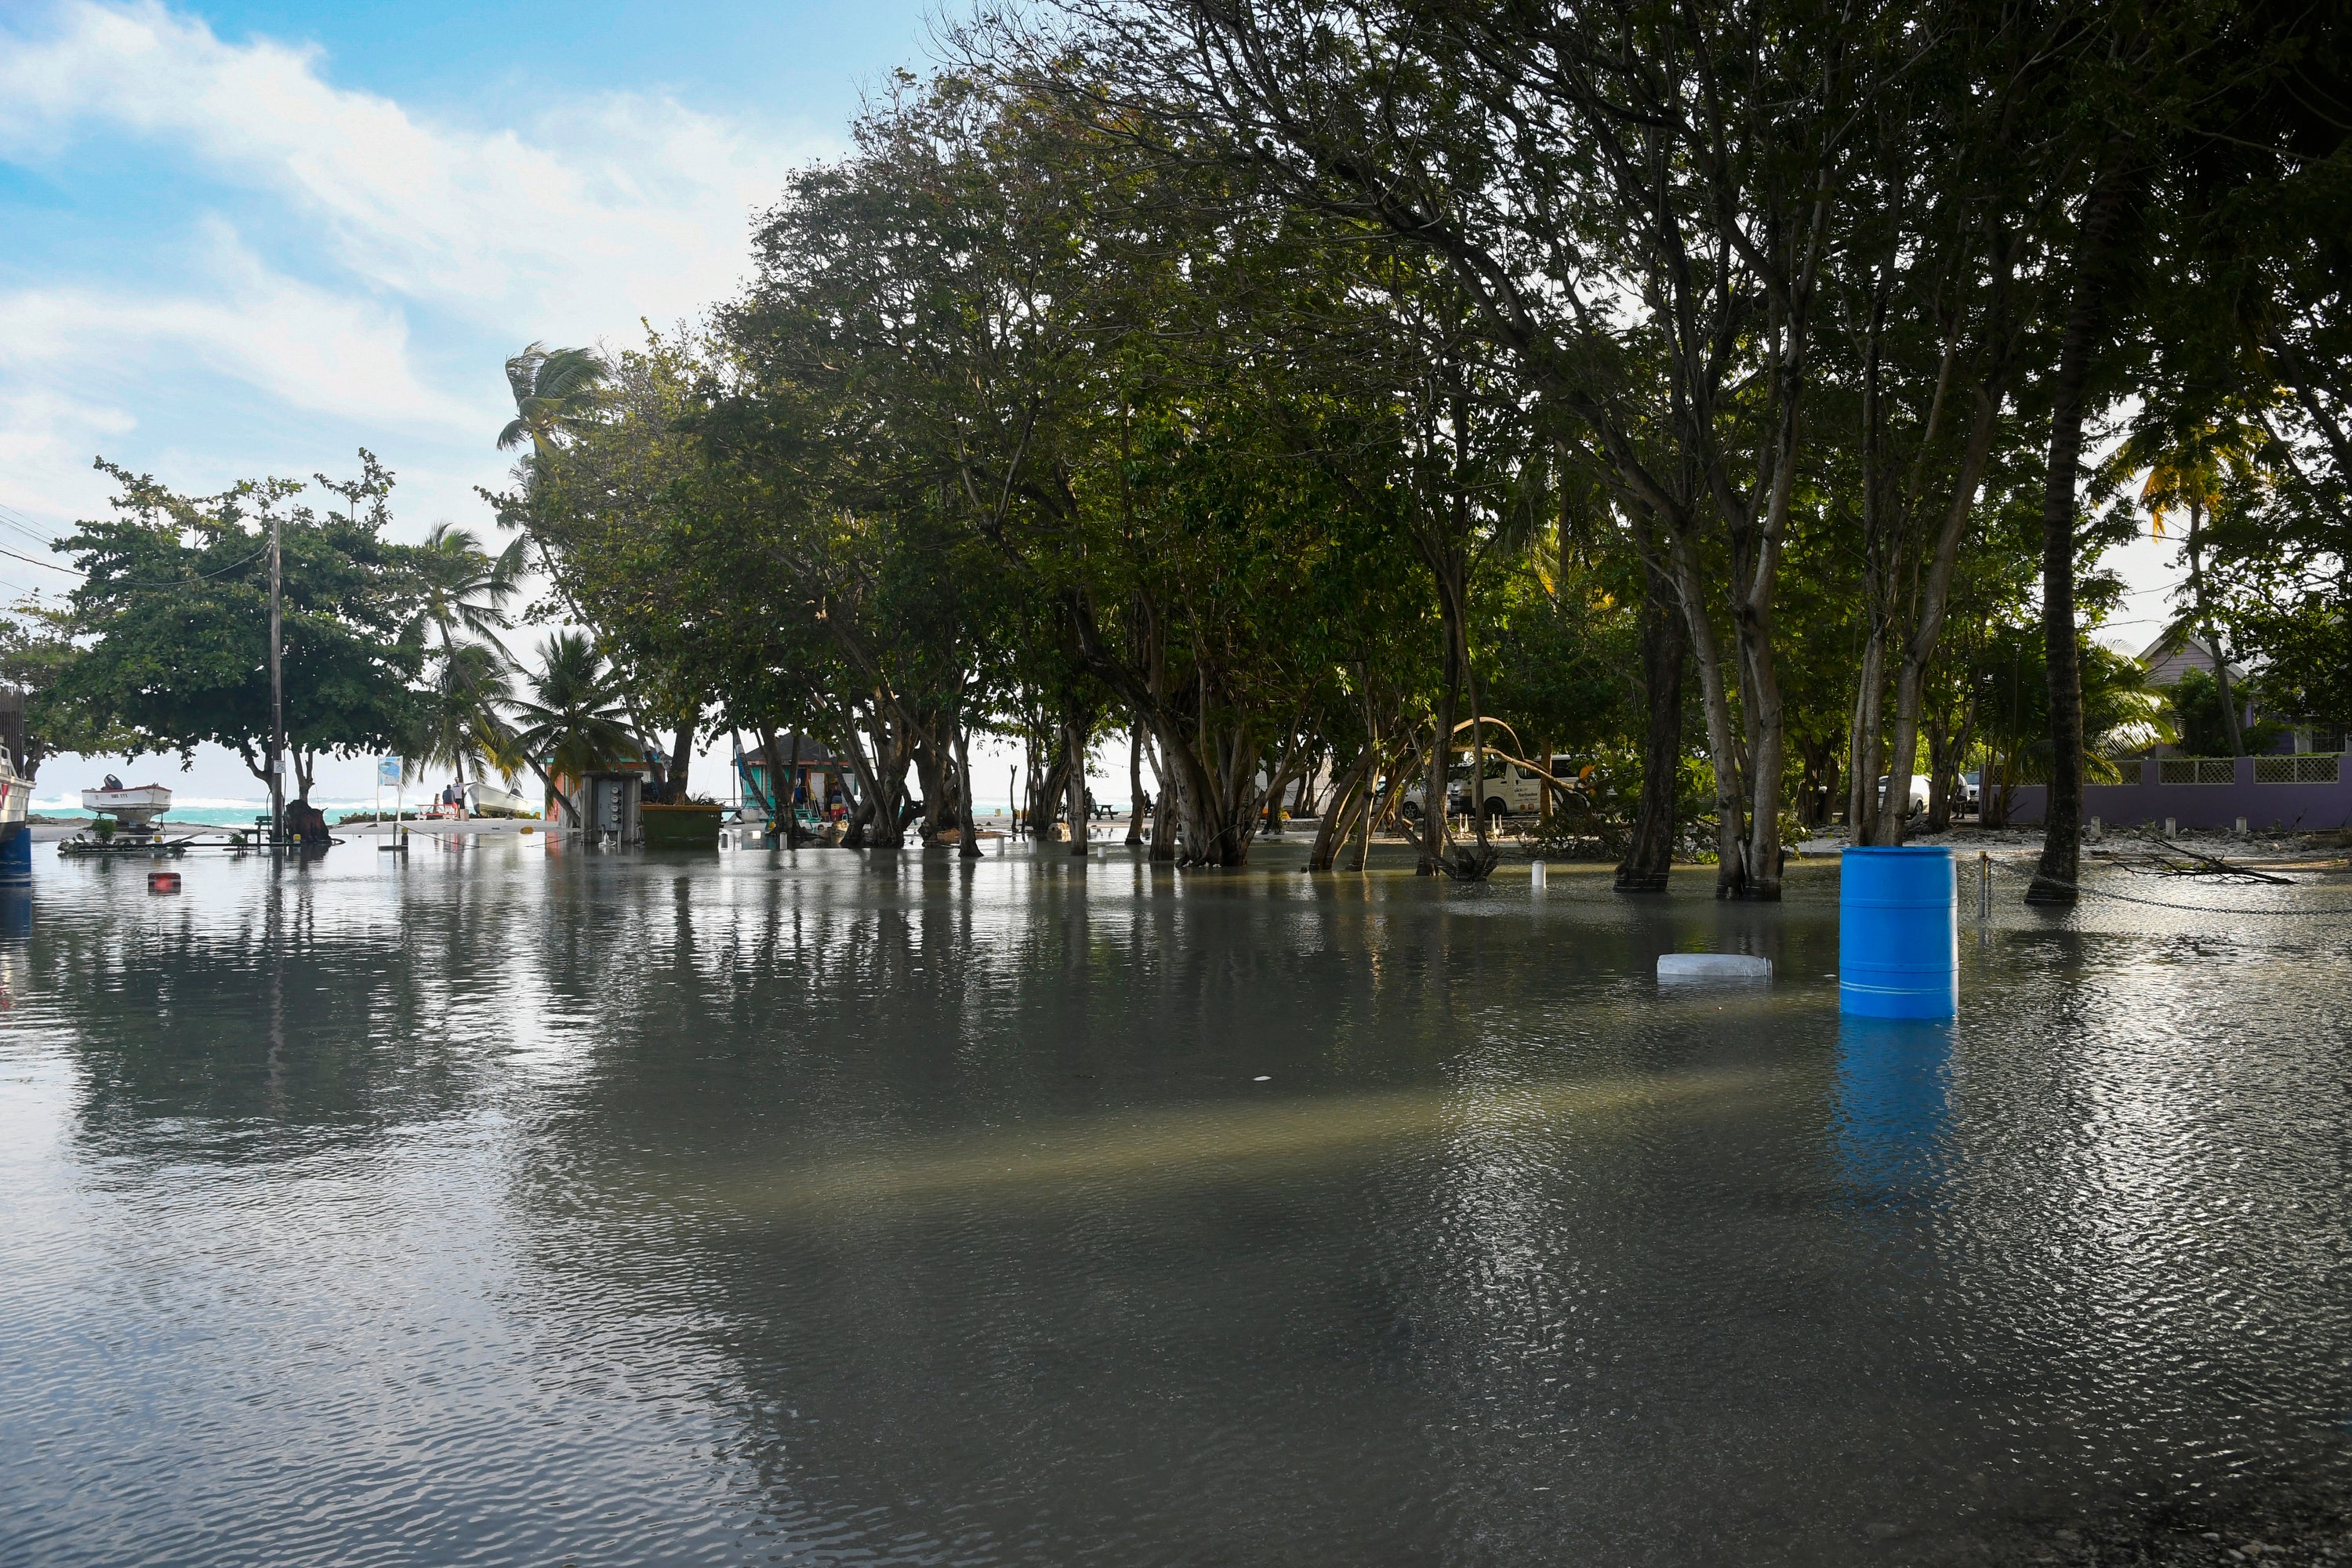 A flooded parking lot is seen after the passing of Hurricane Beryl in Worthing, Christ Church, Barbados